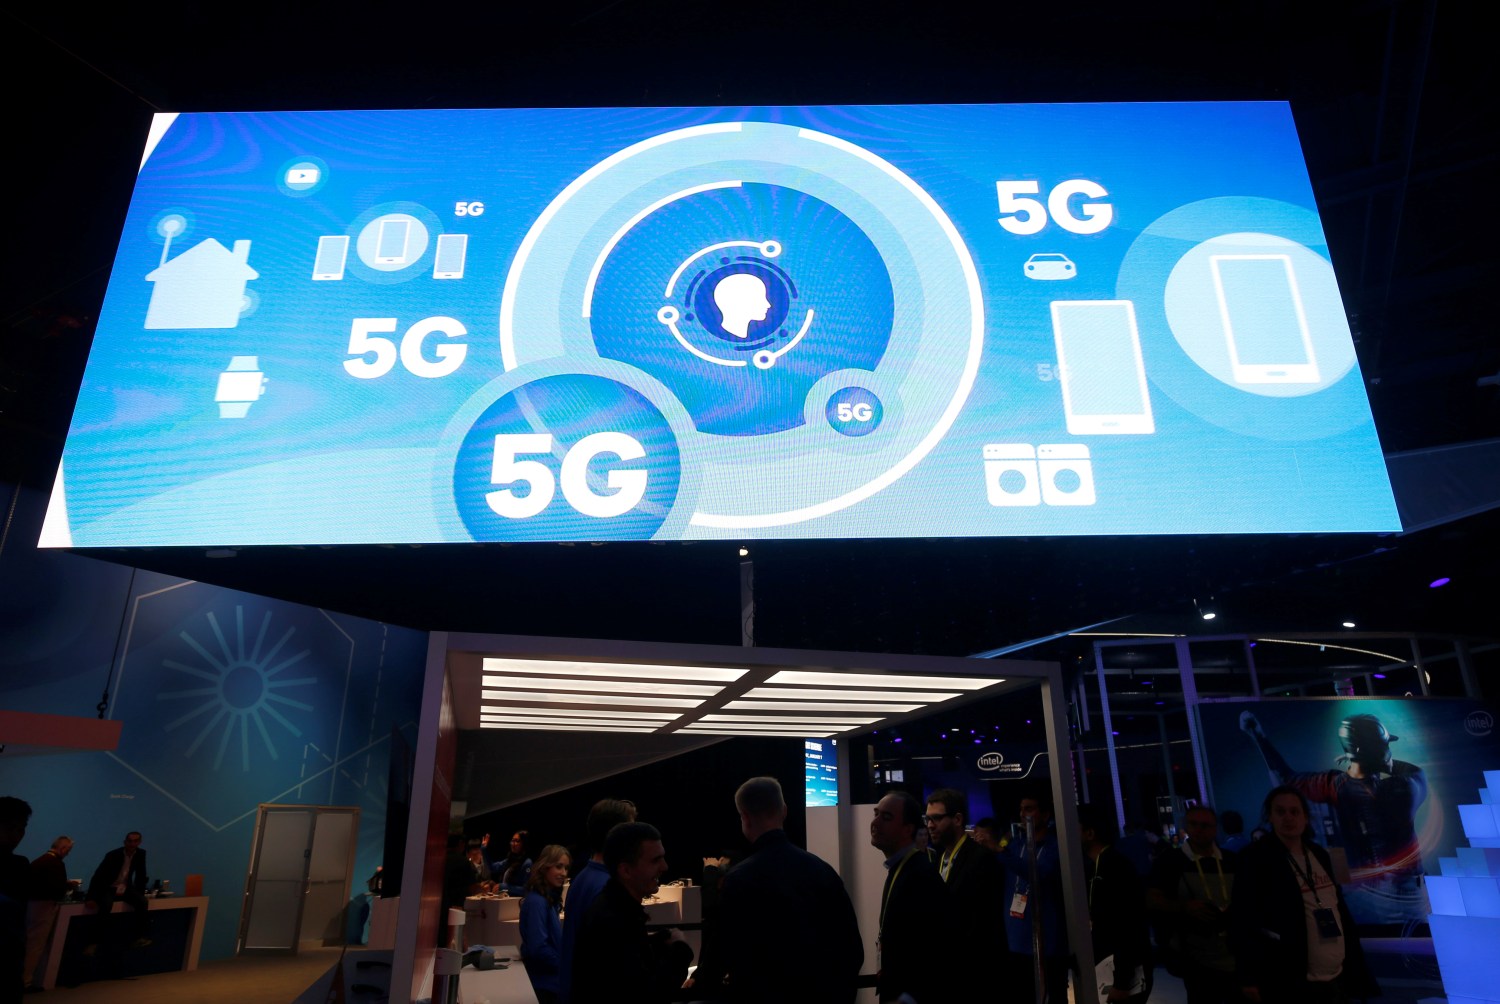 A video promotes the 5G mobile wireless standard at the Qualcomm booth during the 2017 CES in Las Vegas